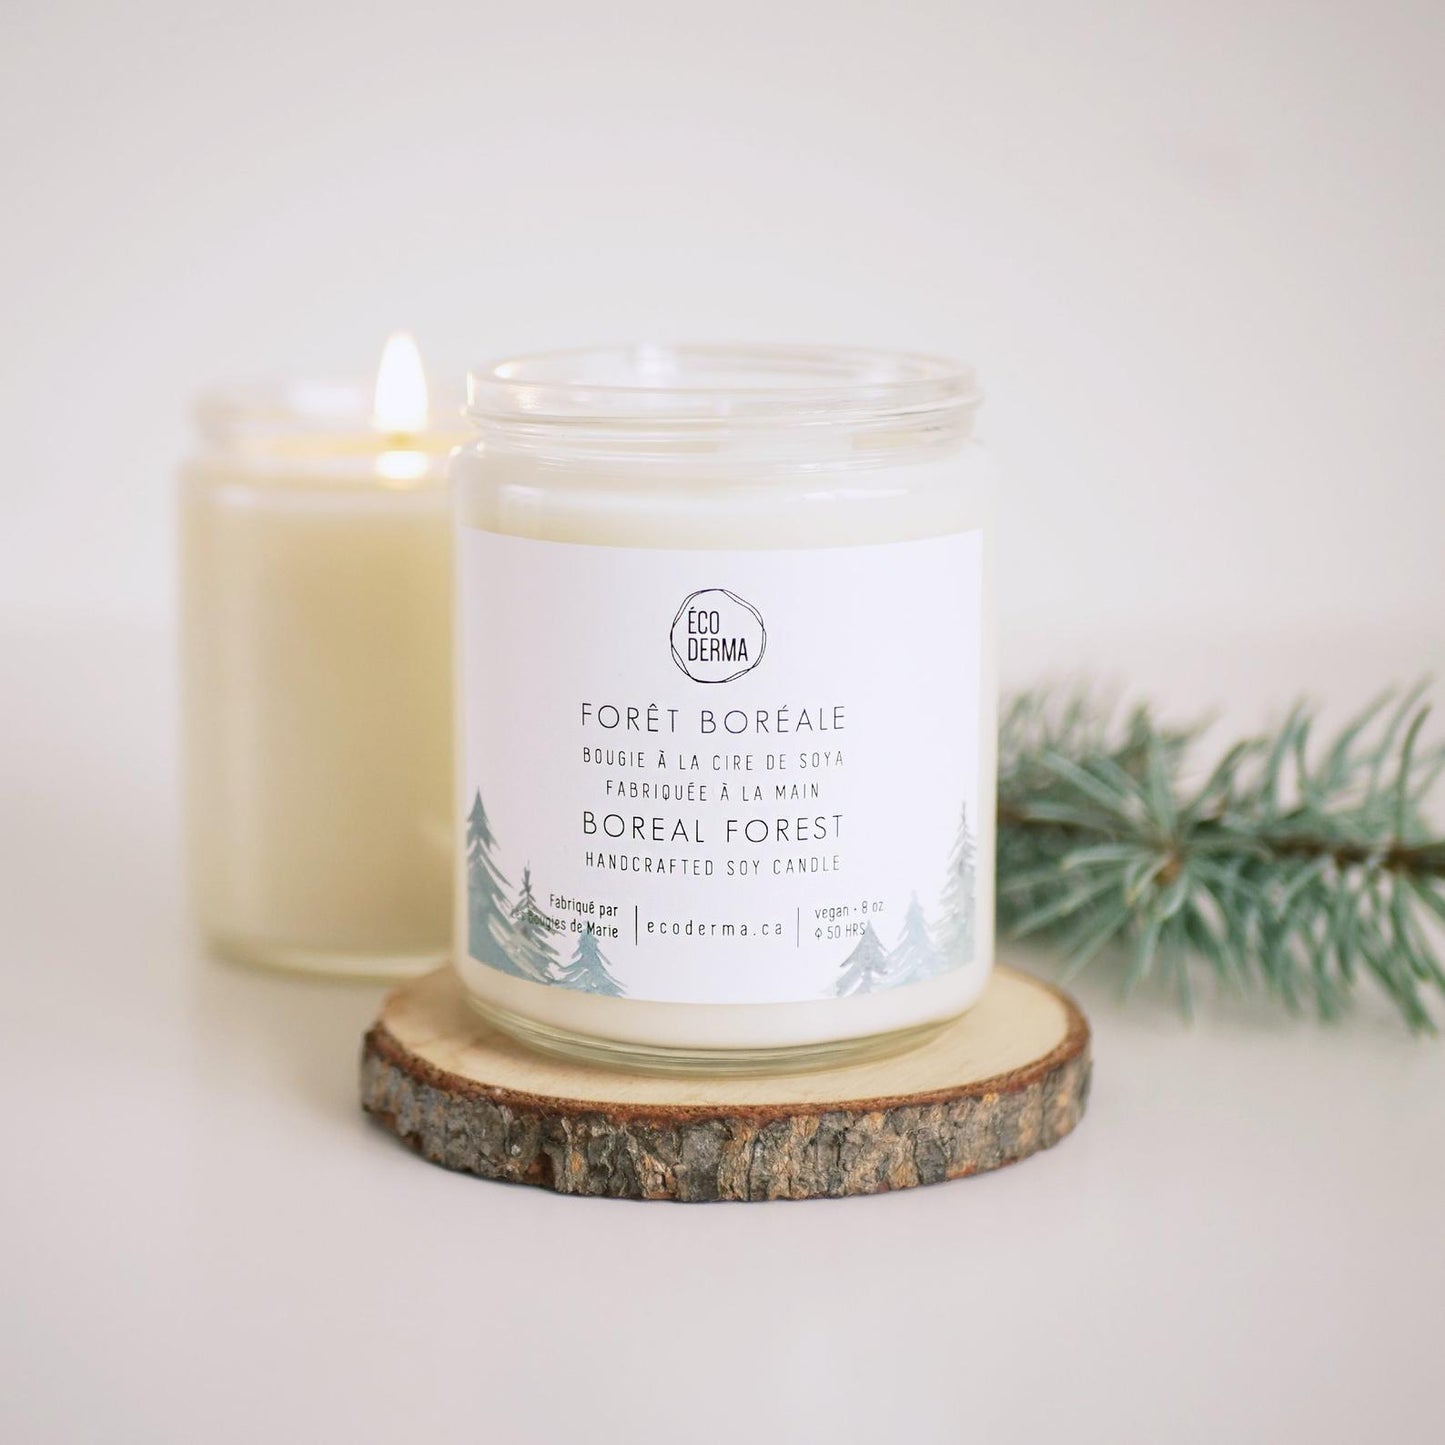 Boreal Forest soy candle